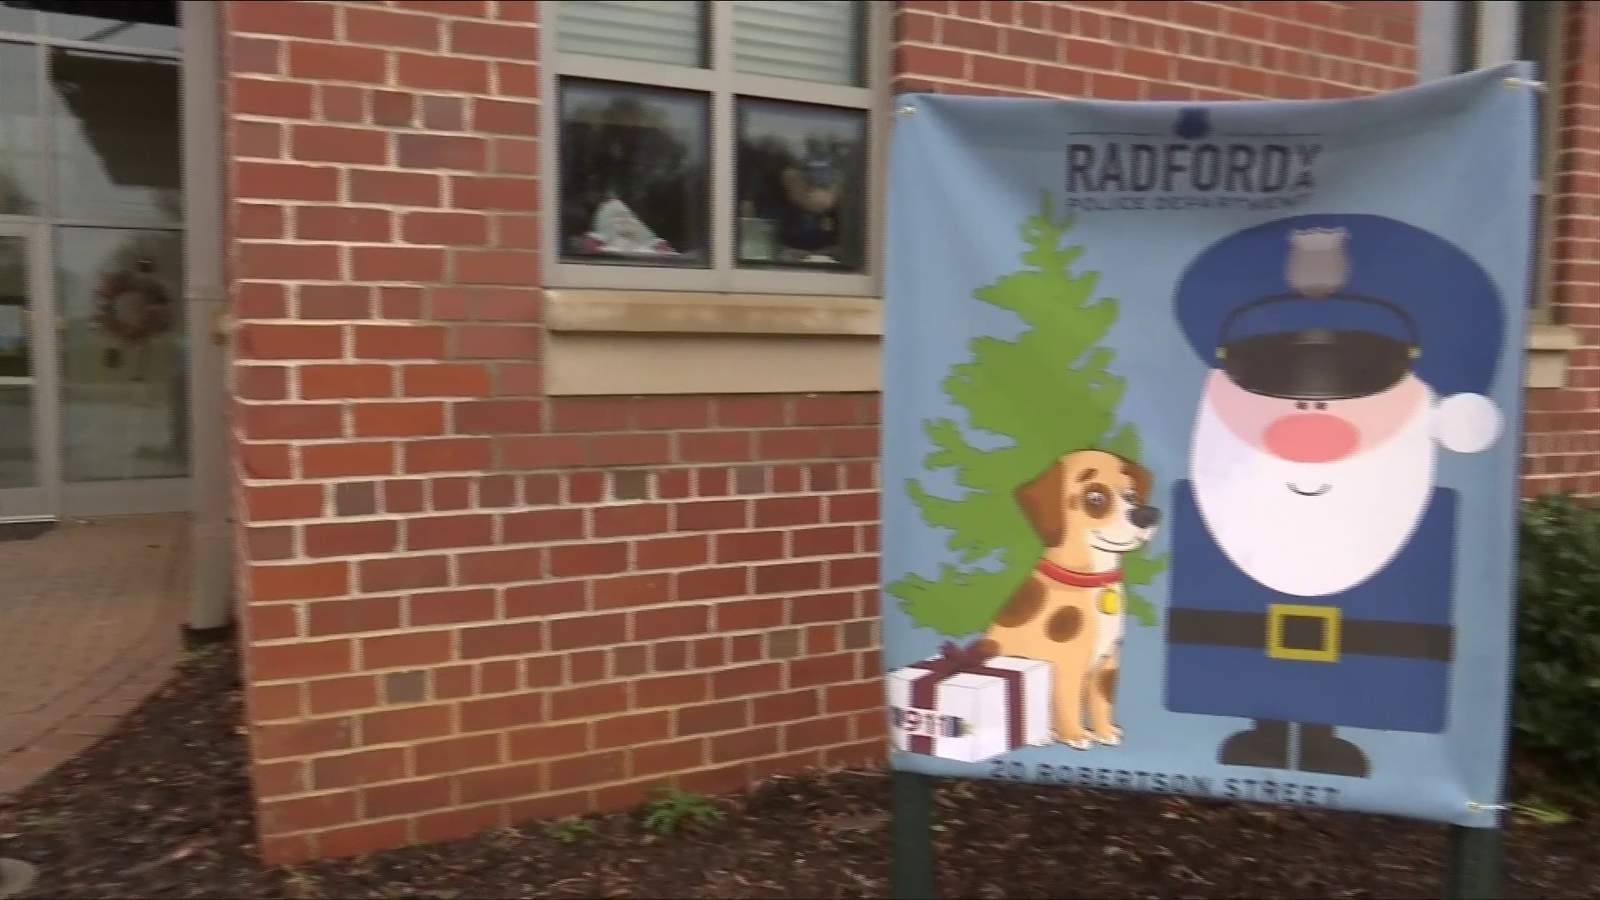 Radford police dispatchers assisted kids on Christmas Eve Santa search